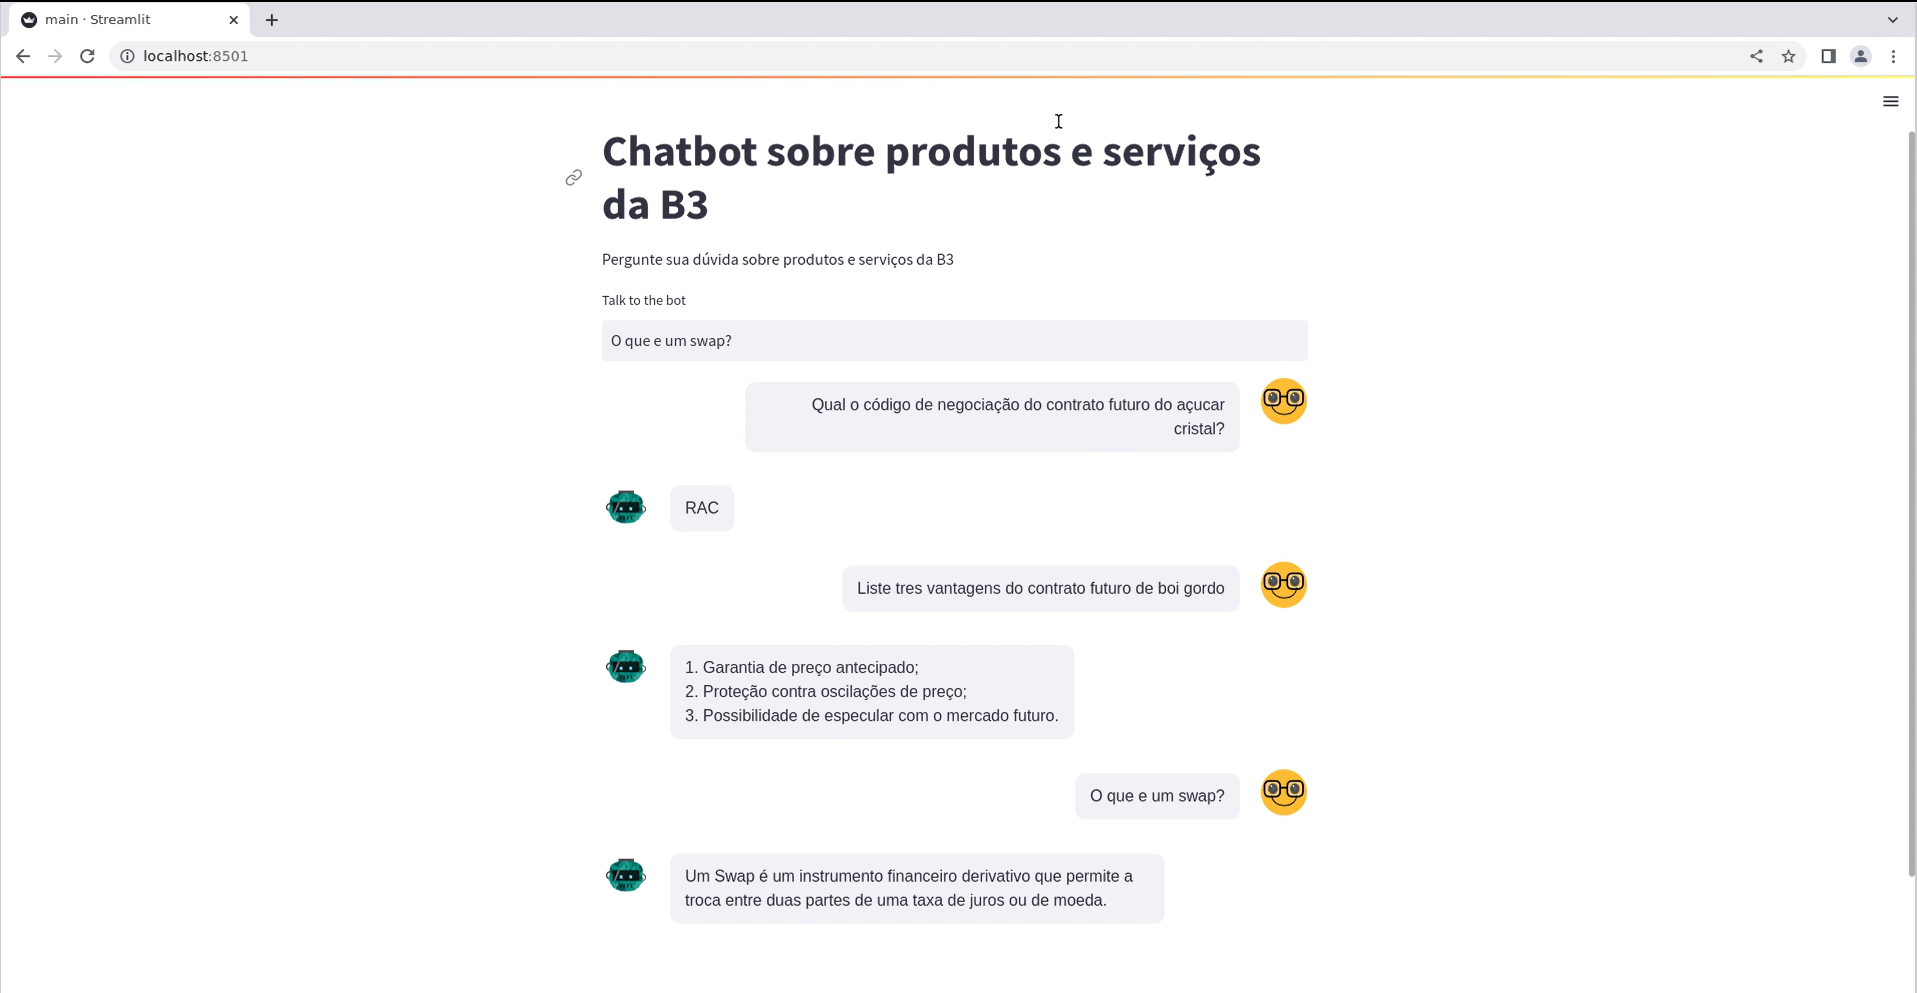 B3 QA Products and Services Chatbot